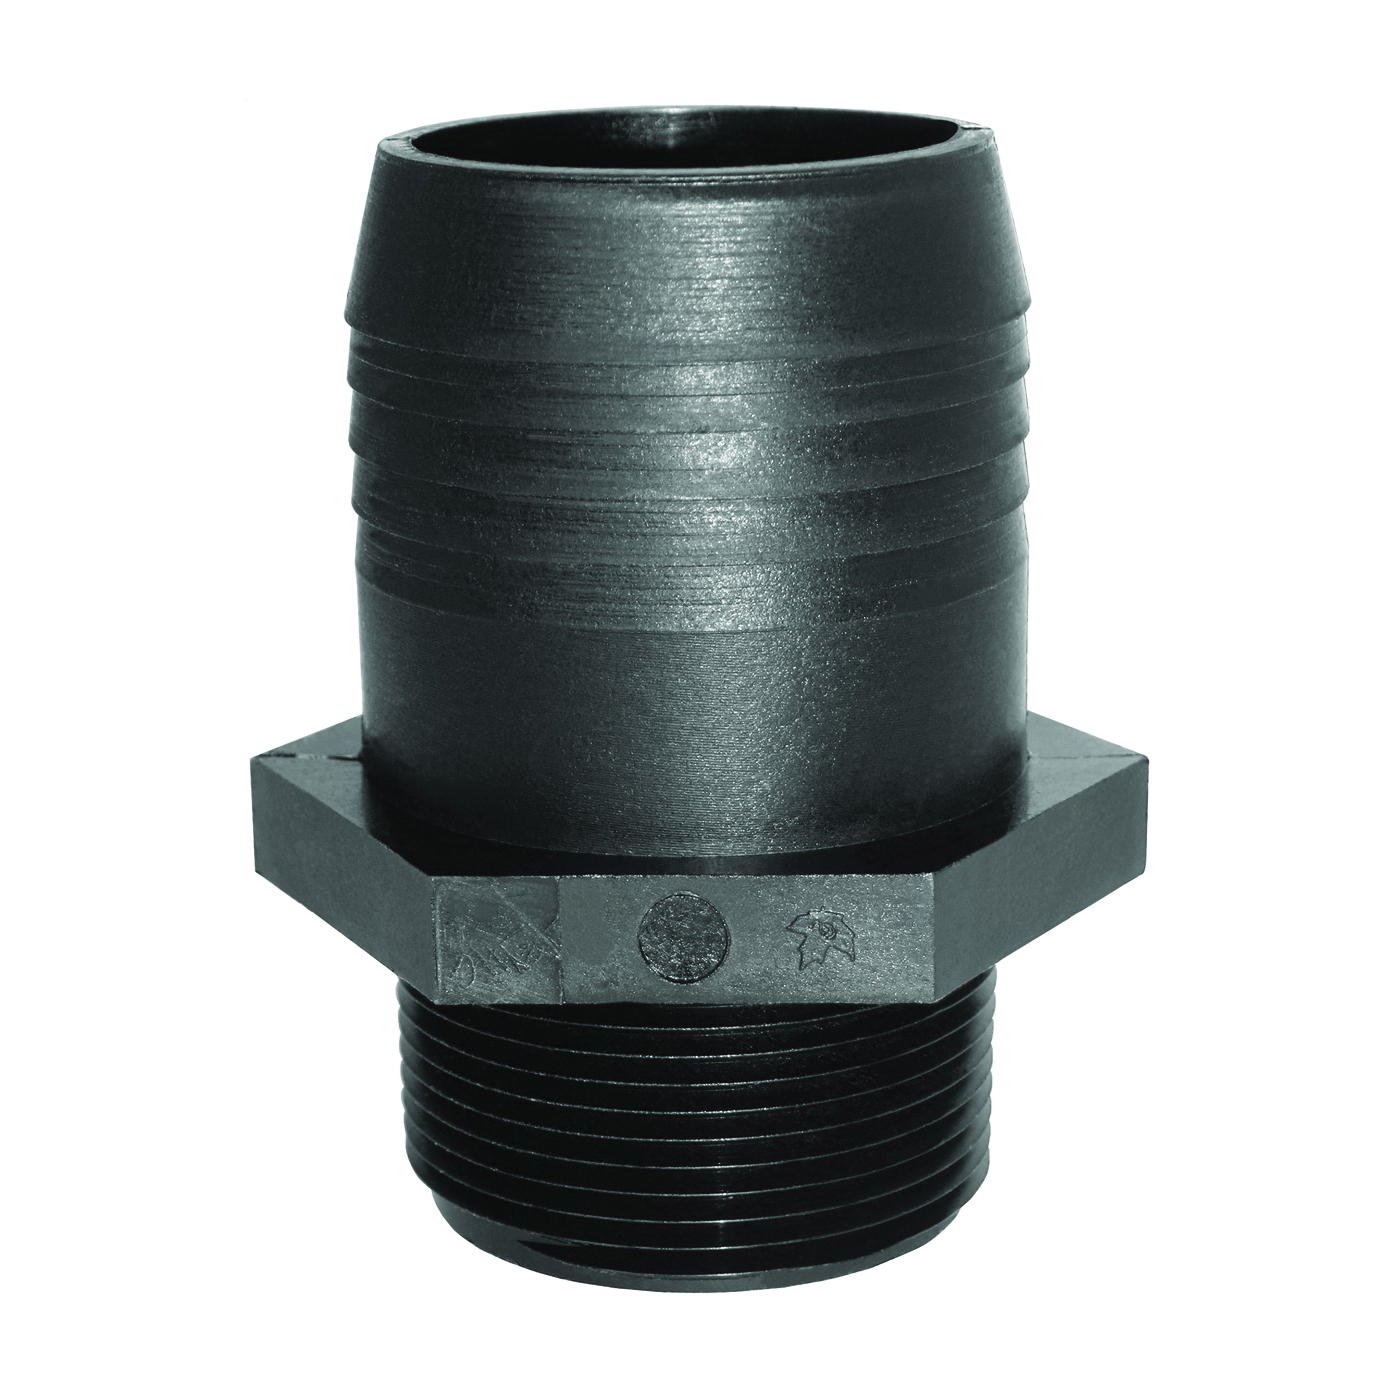 A1212P Adapter, 1/2 in, MPT x Hose Barb, Polypropylene